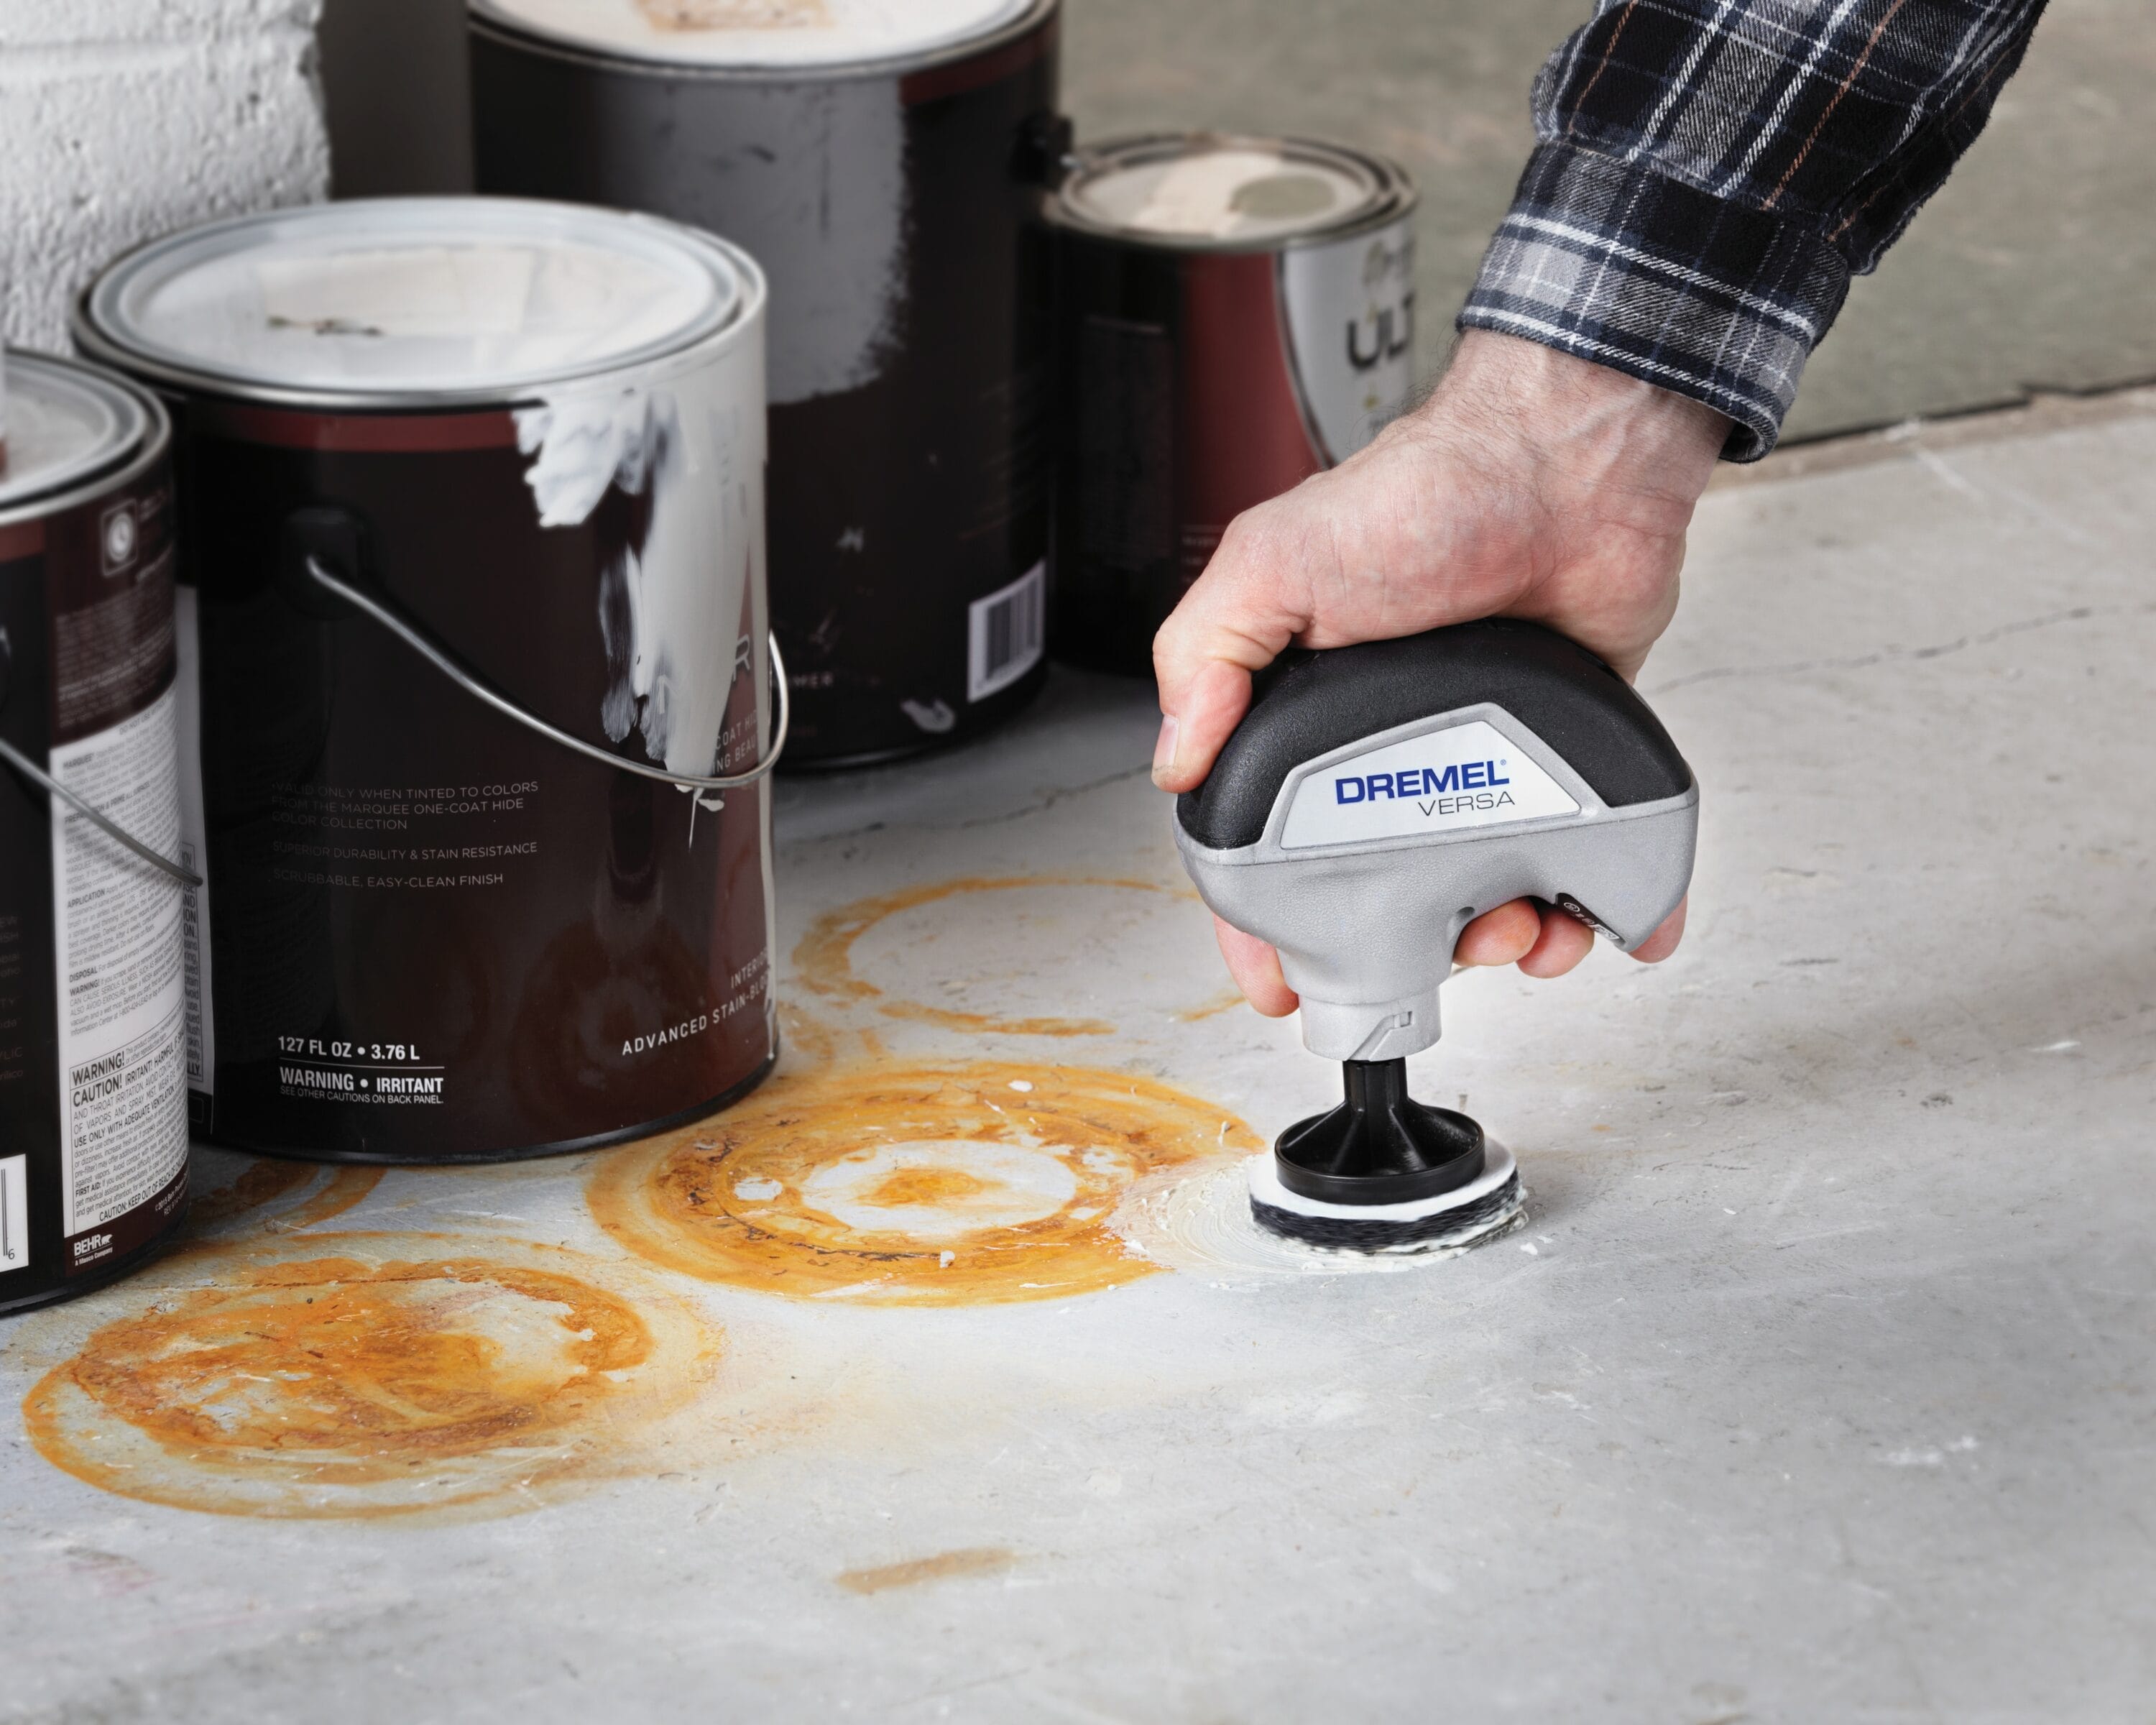 Dremel Versa Power Scrubber in the Power Scrubbers department at